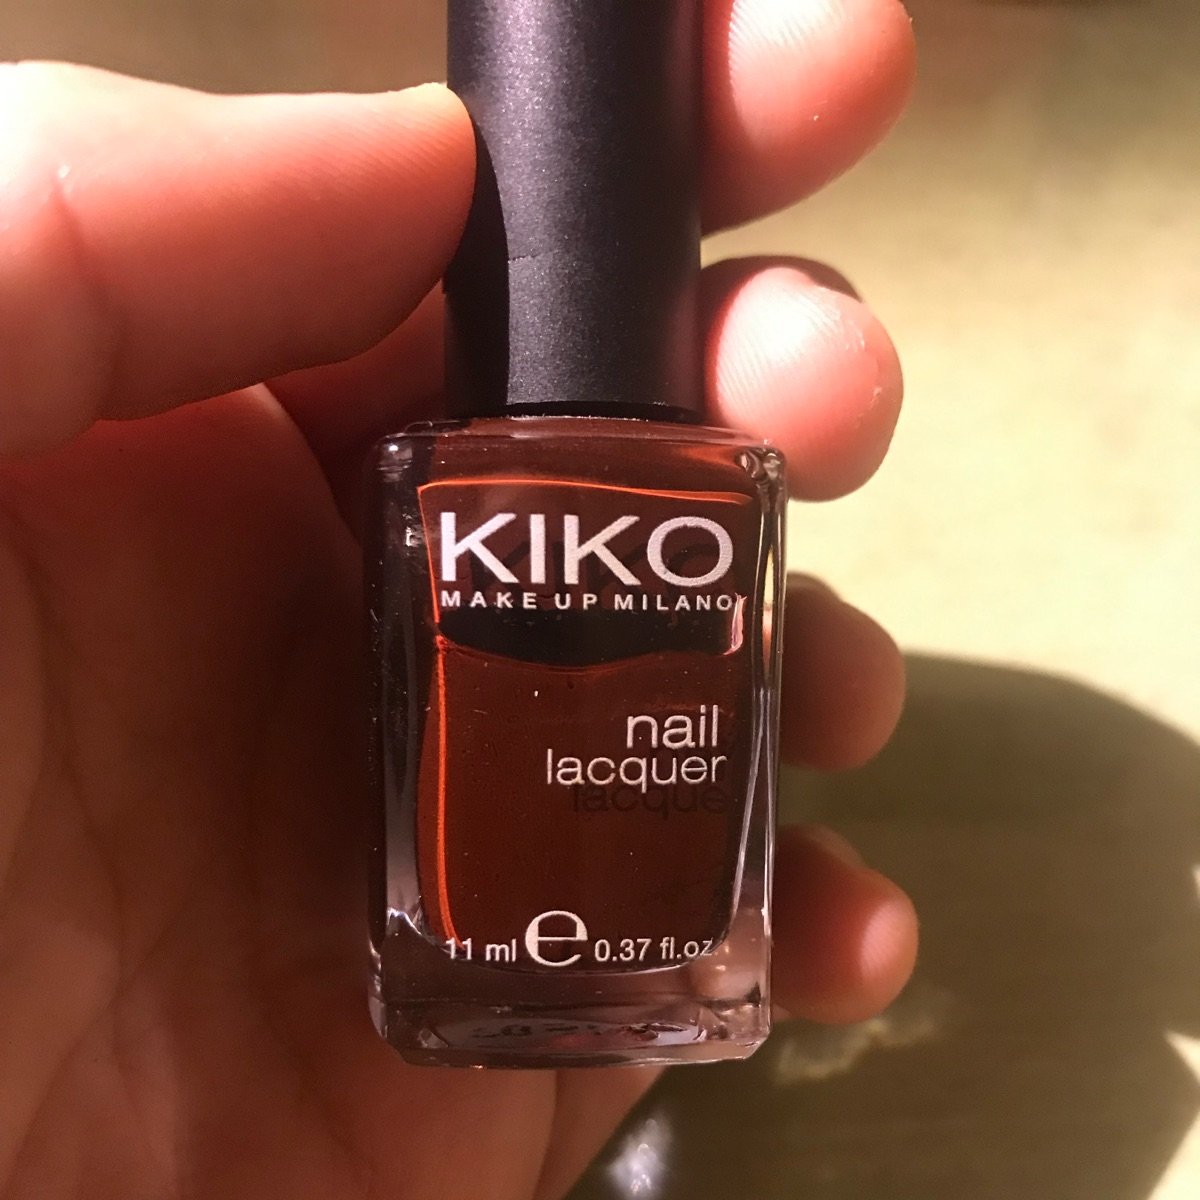 Manicure at home: all the secrets for perfect nails | KIKO